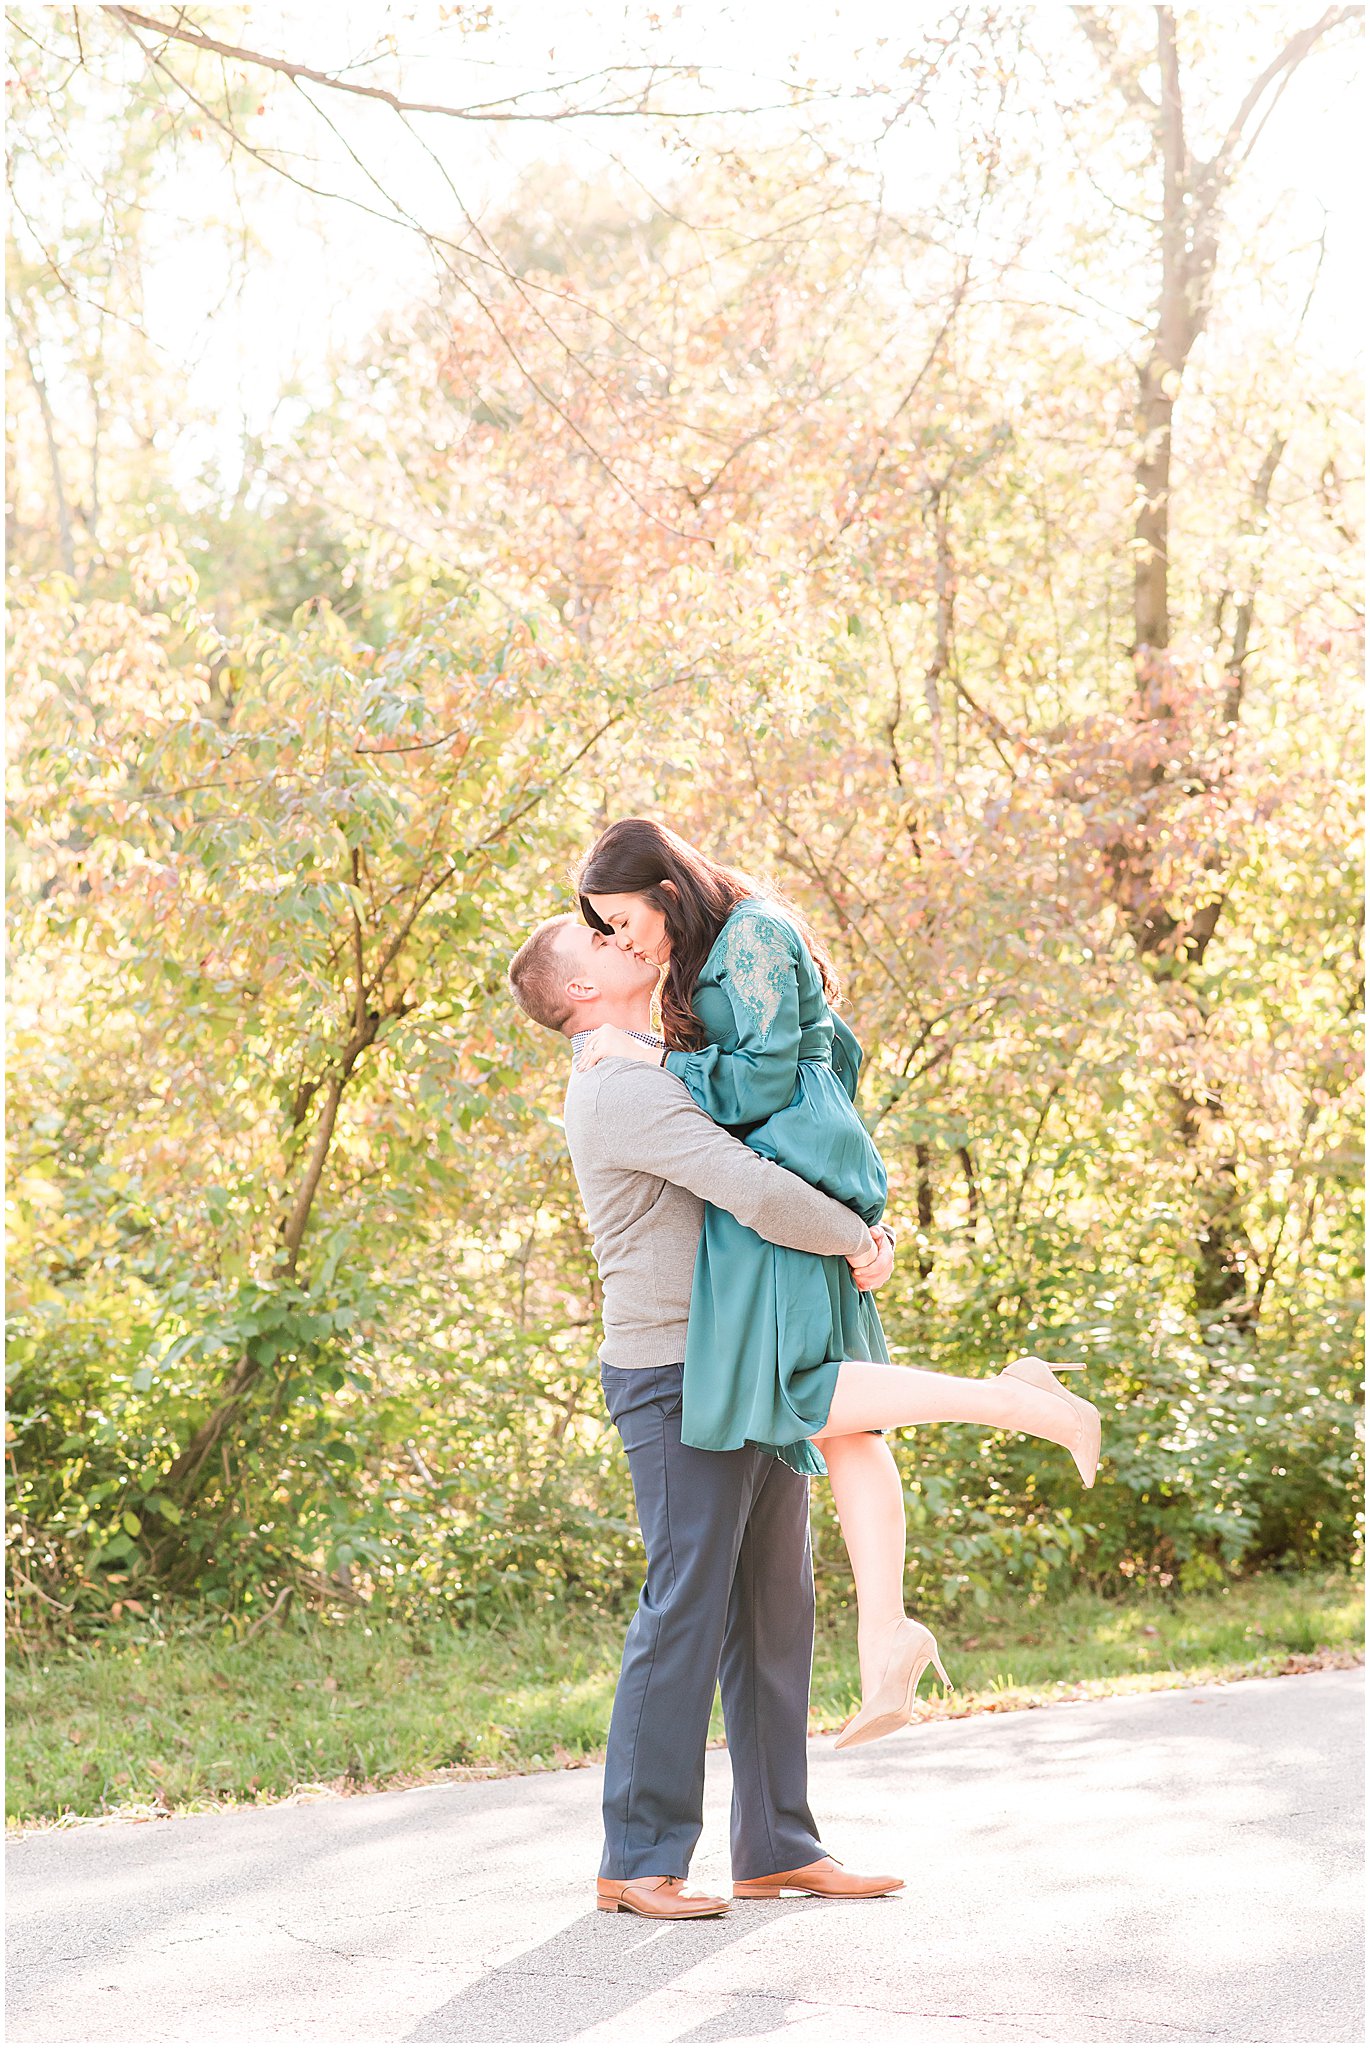 Guy lifting girl as they kiss during Eagle Creek Park couples session